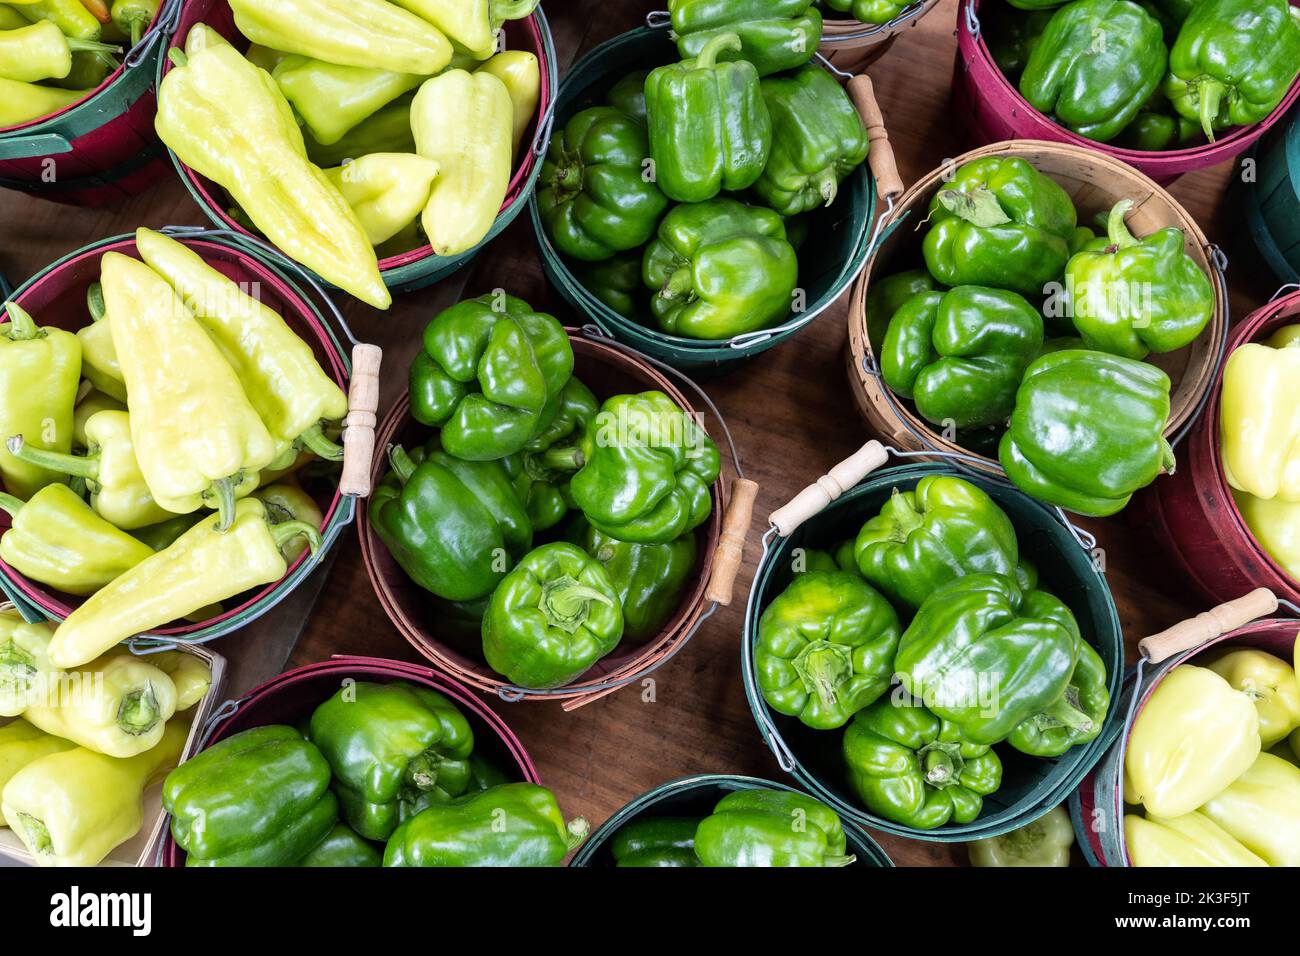 Organic and fresh green peppers in the case at the market Stock Photo